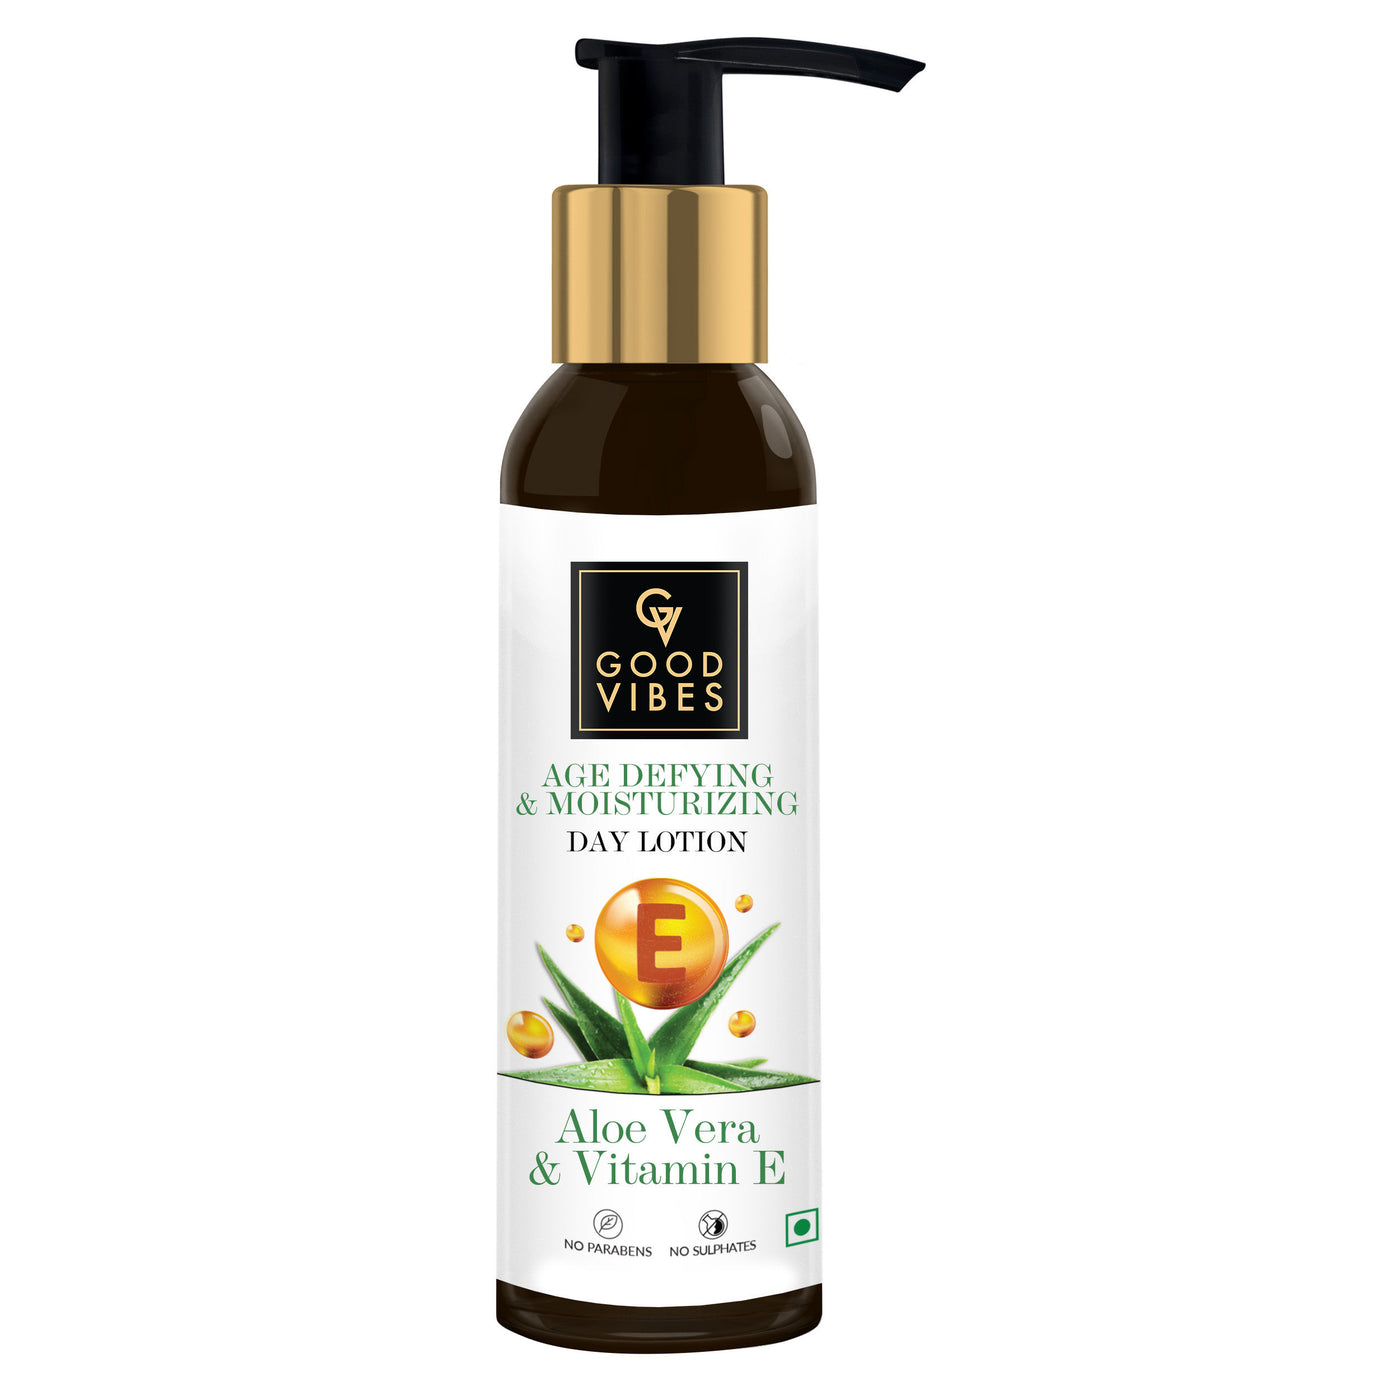 good-vibes-plus-aloe-vera-vitamin-e-age-defying-moisturizing-day-face-lotion-with-milk-protein-hydrating-no-parabens-no-sulphates-120-ml-8